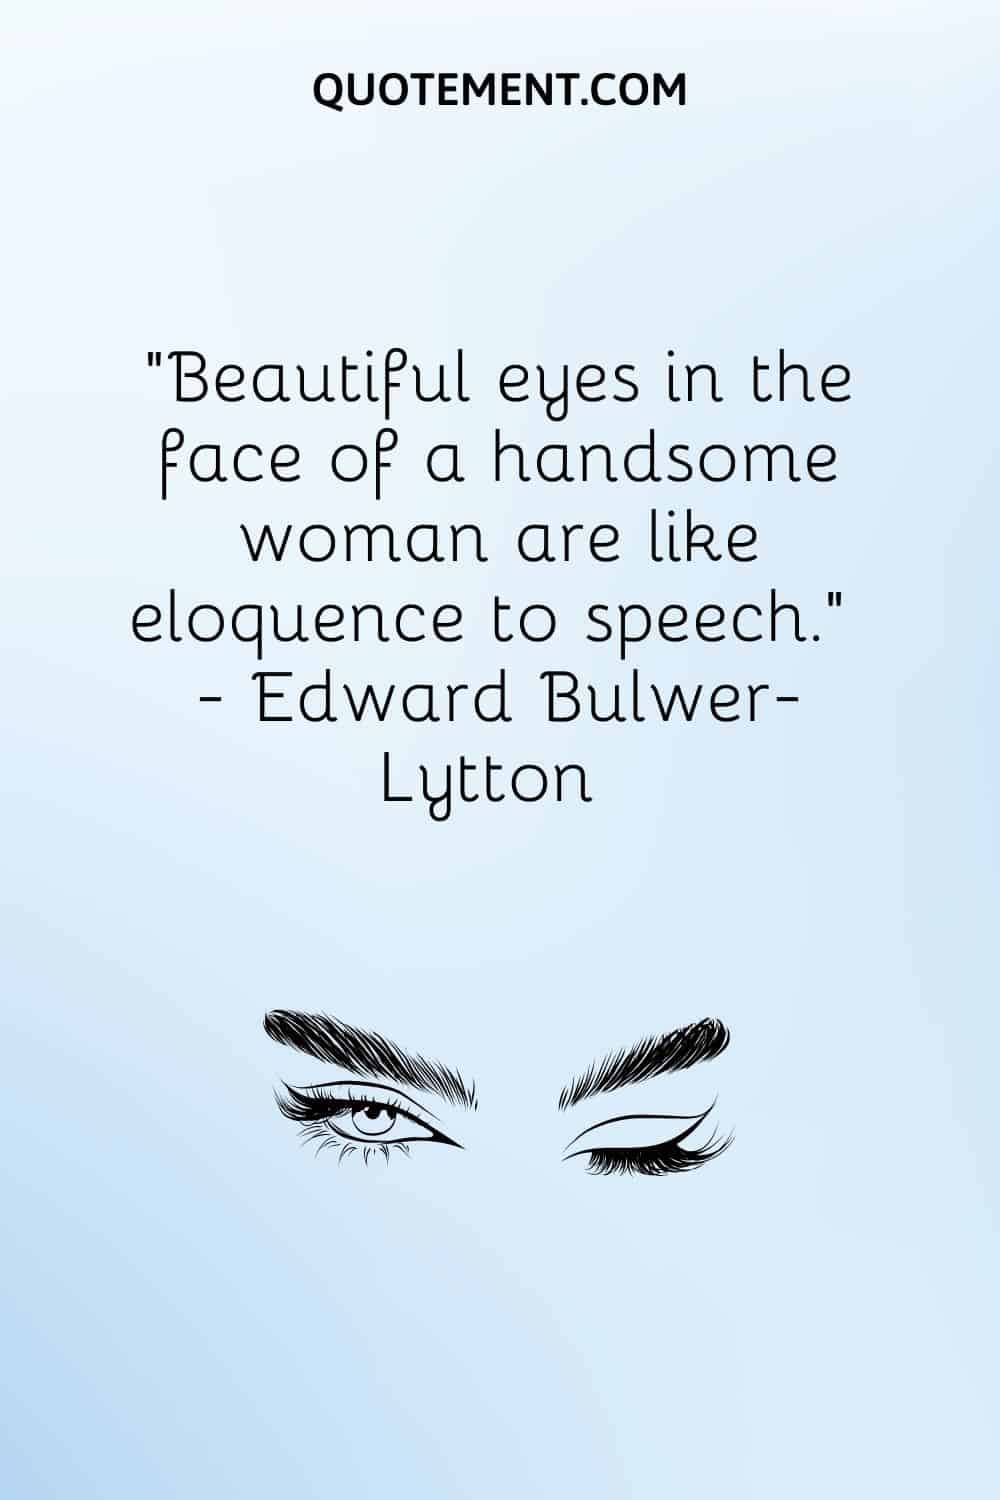 Beautiful eyes in the face of a handsome woman are like eloquence to speech